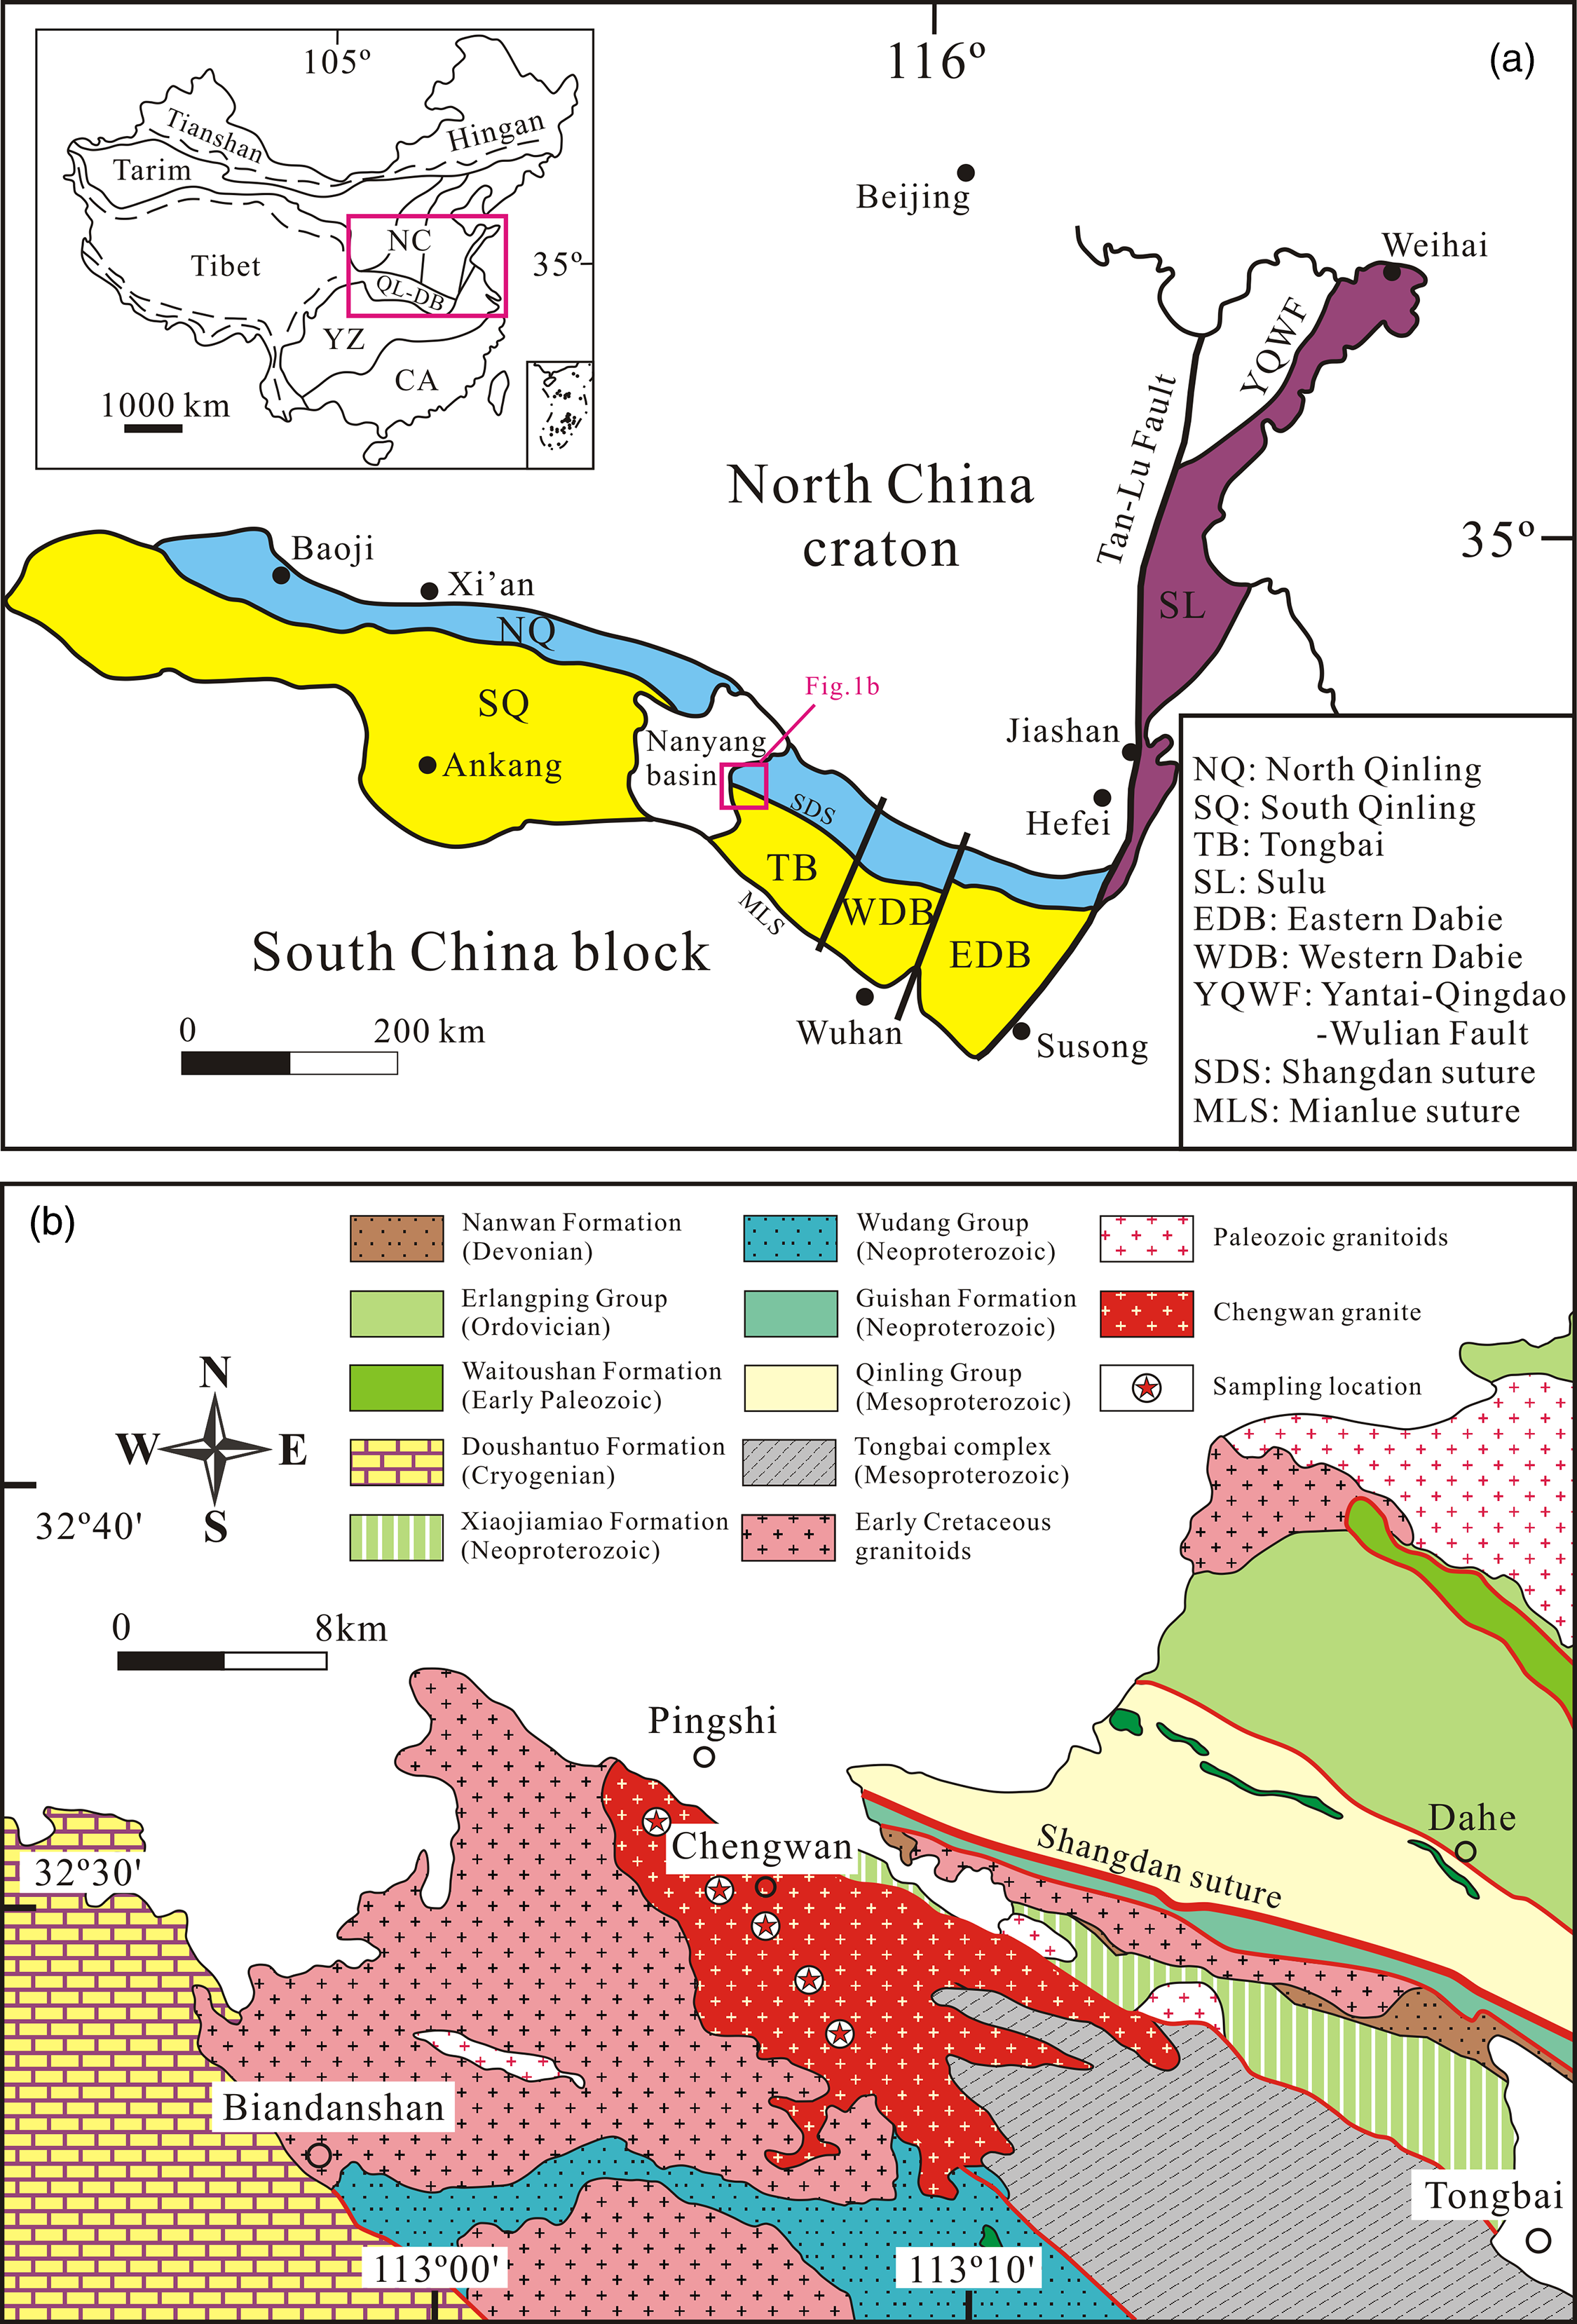 a) Schematic geological map of North Qinling orogenic belt